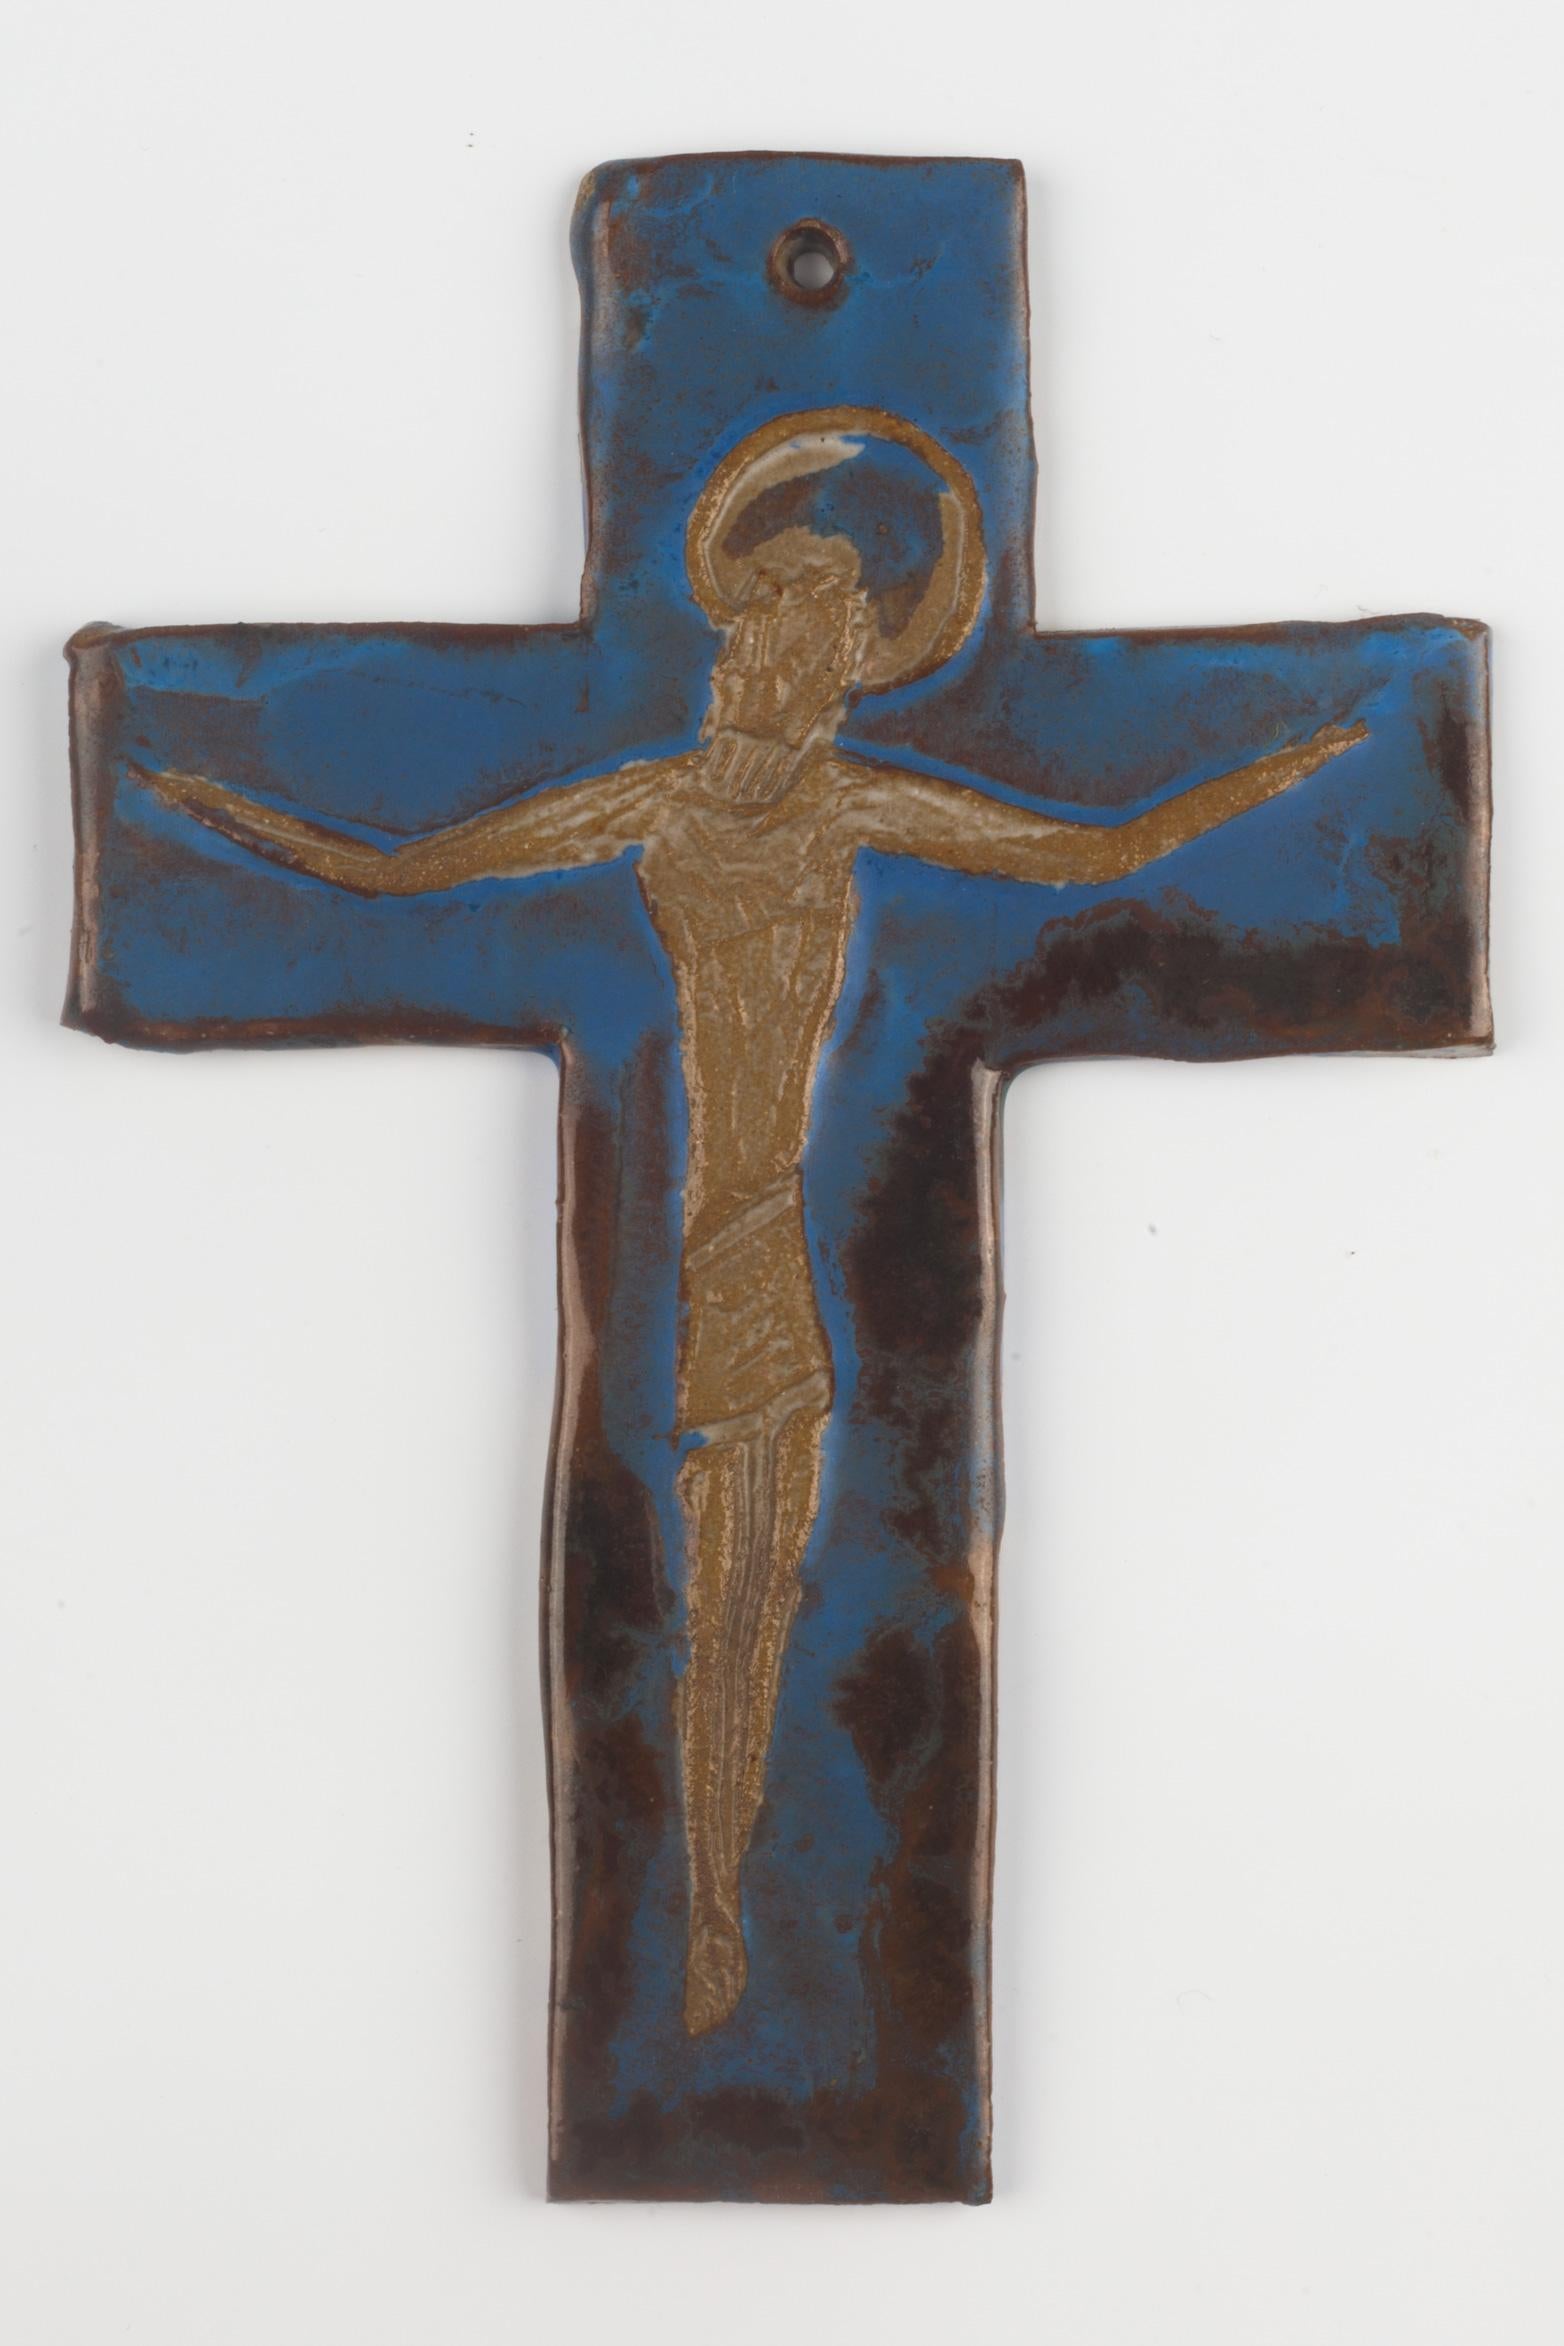 Ceramic, handmade wall crucifix in ceramic with a stone like texture. Artisan made in Belgium in the 1960s. Beautiful color balance with light brown Christ figure floating over blue and dark brown cross. 

From modernism to brutalism, the crosses